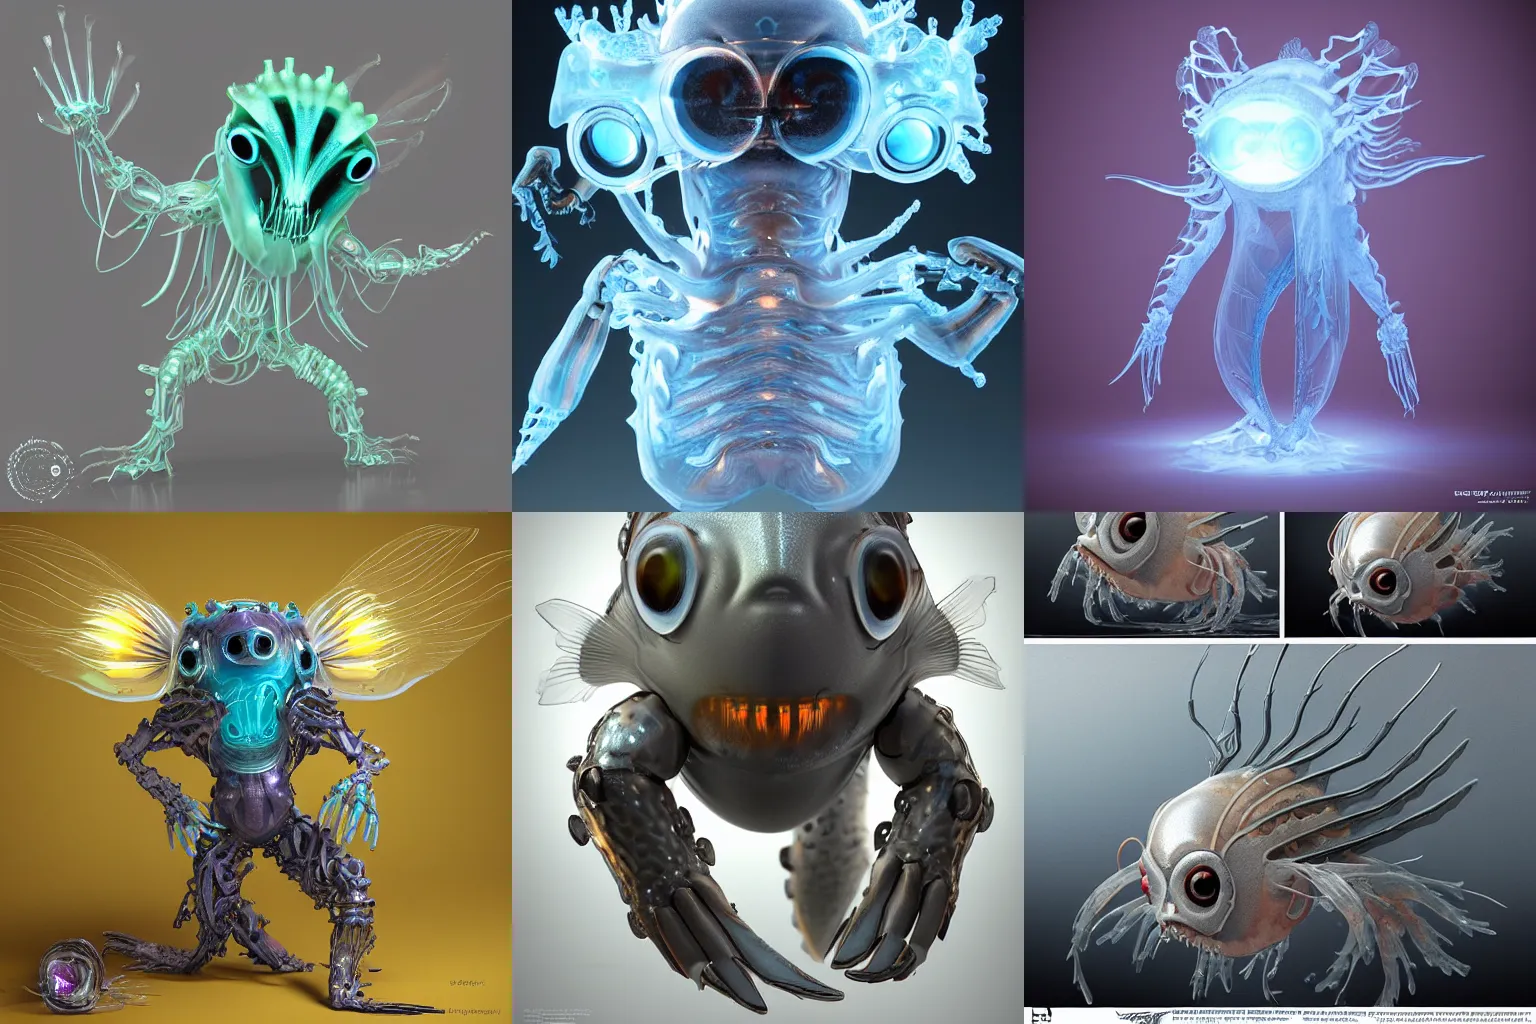 Prompt: cute! biomechanical mask, ghost shrimp, Barreleye fish, translucent SSS xray, Barreleye, rimlight, jelly fish dancing, fighting, bioluminescent screaming pictoplasma characterdesign toydesign toy monster creature, zbrush, octane, hardsurface modelling, artstation, cg society, by greg rutkowksi, by Eddie Mendoza, by Peter mohrbacher, by tooth wu